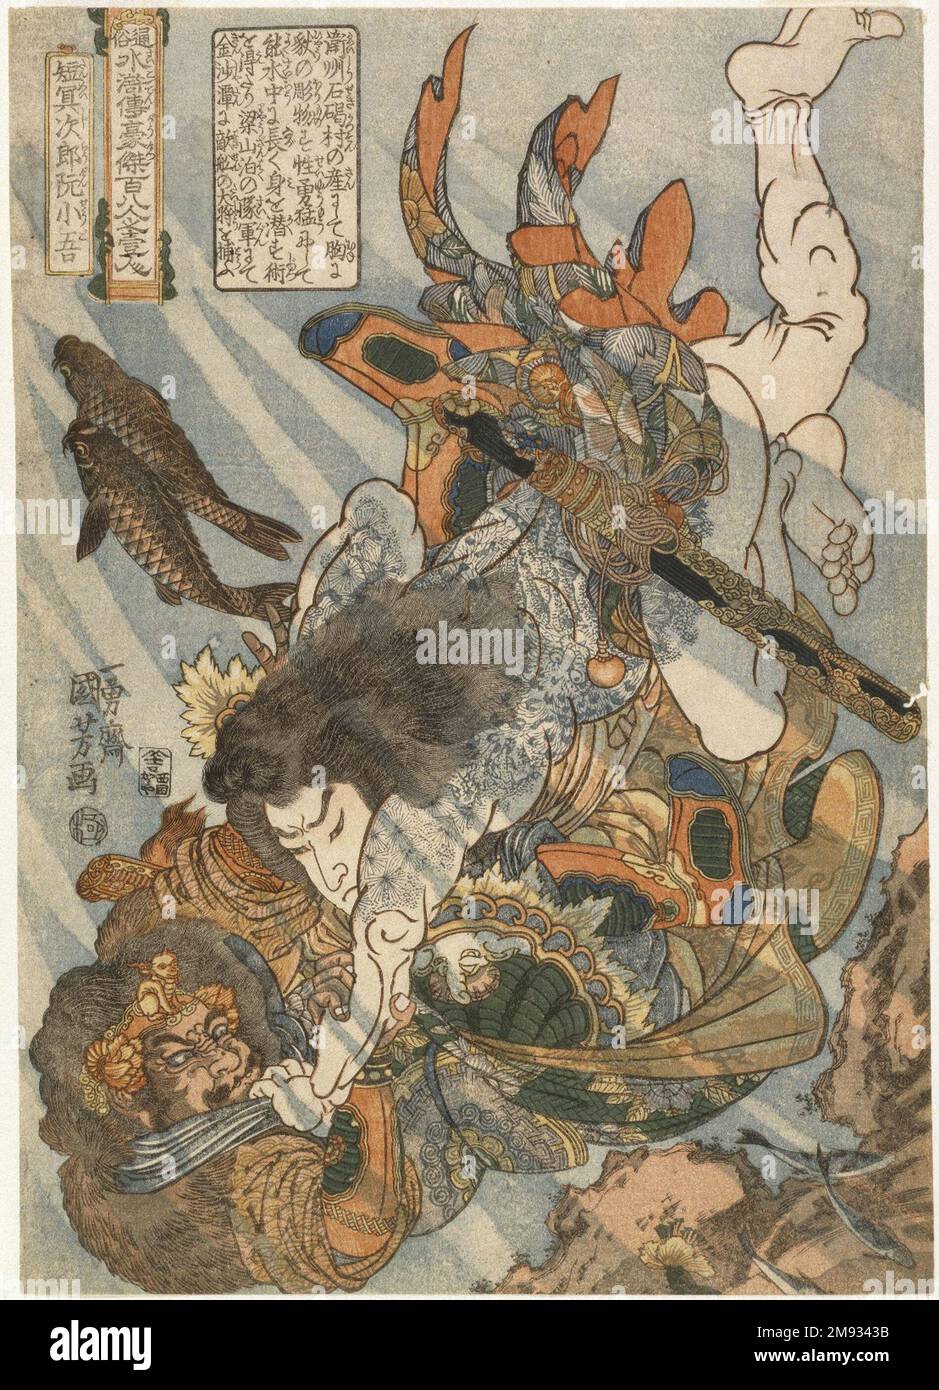 Tammeijiro Genshogo, from the series Tsuzoku Suikoden Goketsu Hyakuhachinin no Hitori Utagawa Kuniyoshi (Japanese, 1798-1861). , ca. 1823. Color woodblock print on paper, 14 5/16 x 10 3/16 in. (36.4 x 25.8 cm).  As described in the square box of text in the upper left corner, the bandit Tanmeijiro Genshogo was known for his striking tattoo as well as his ability to stay under water for a long period of time. Kuniyoshi depicts the bandit wrestling with an opponent under water. The water is rendered with great skill, with a layer of modulated blue ink printed over the entire composition. Asian A Stock Photo